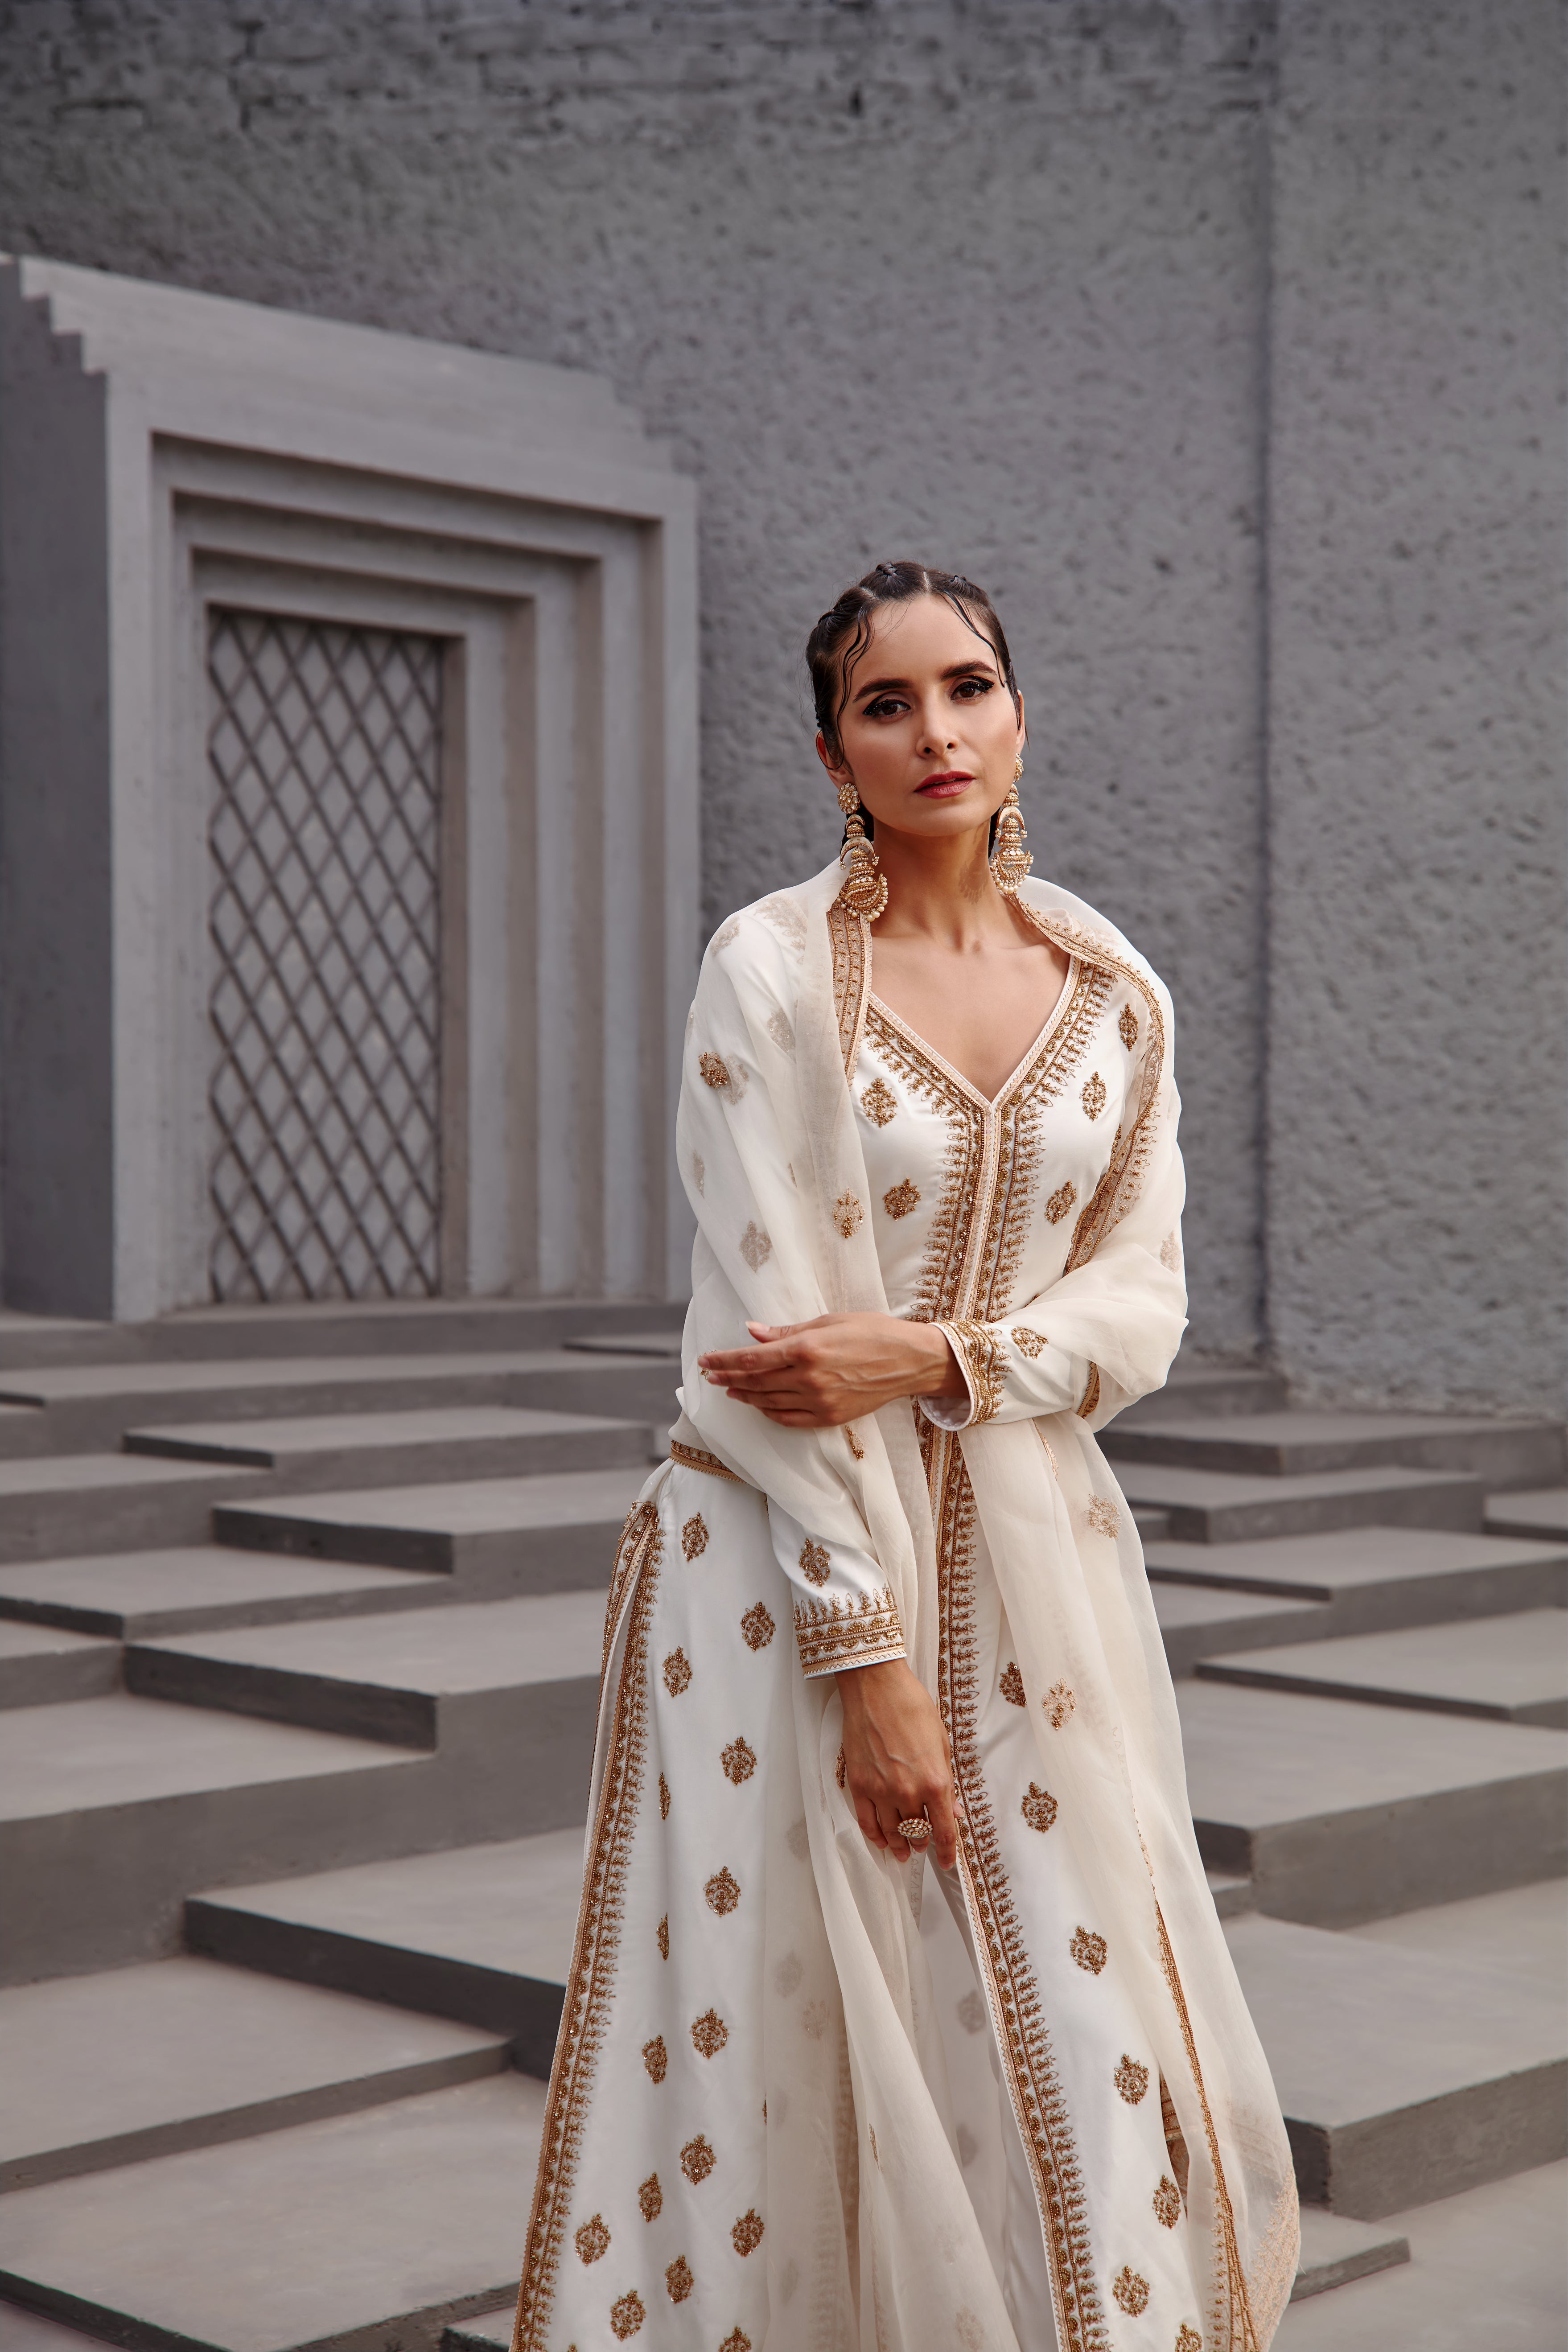 Jigar Mali - Pearl White Embroidered Jacket Set